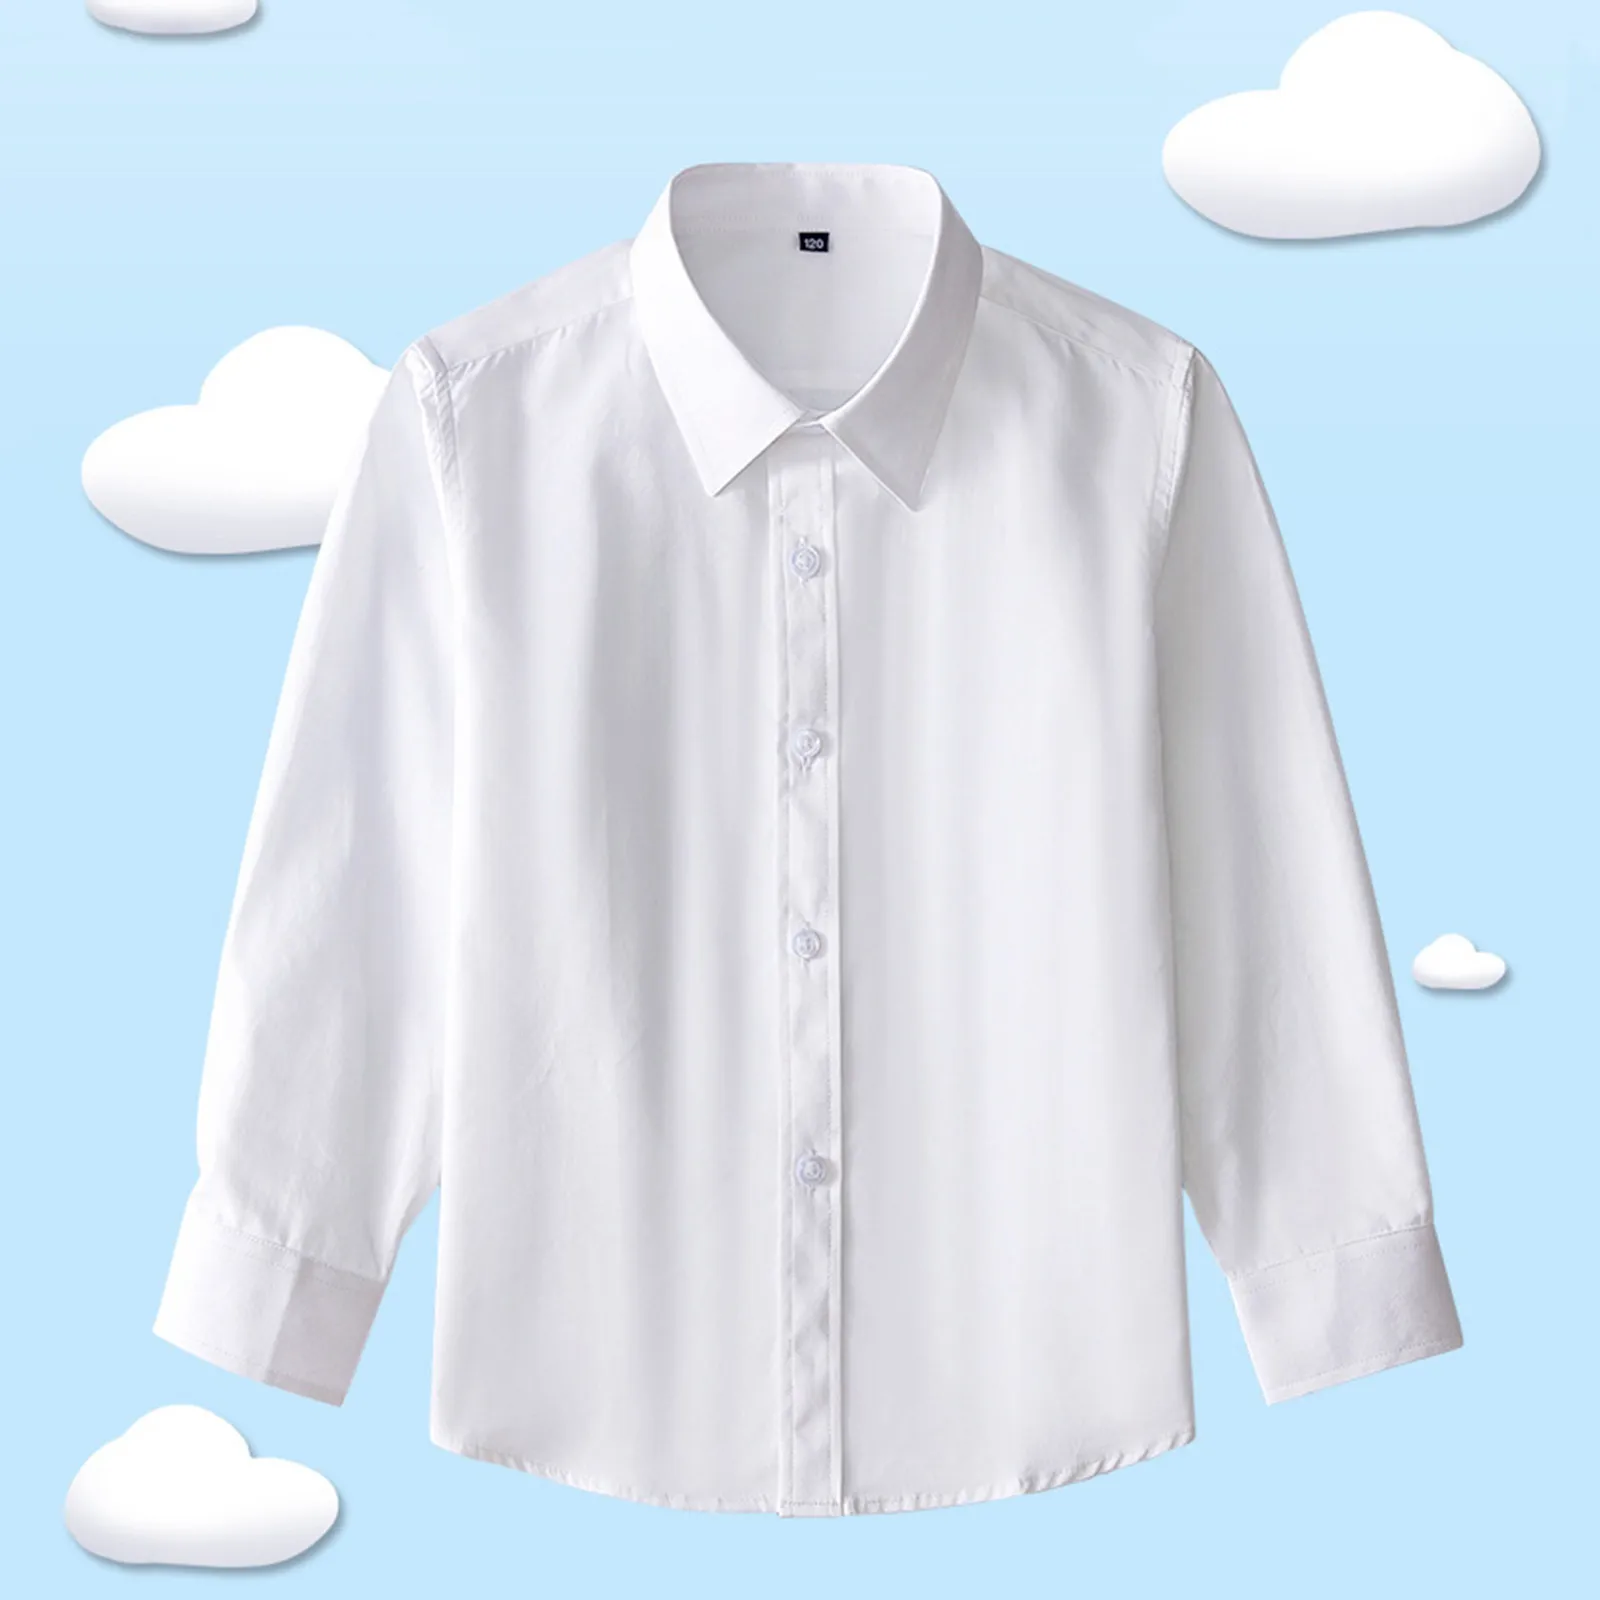 Teenagers School Clothes Formal Wear Boys Girls White Shirts for Students Uniform Long Sleeve Cotton Blouse 4 6 8 10 12 Years enlarge